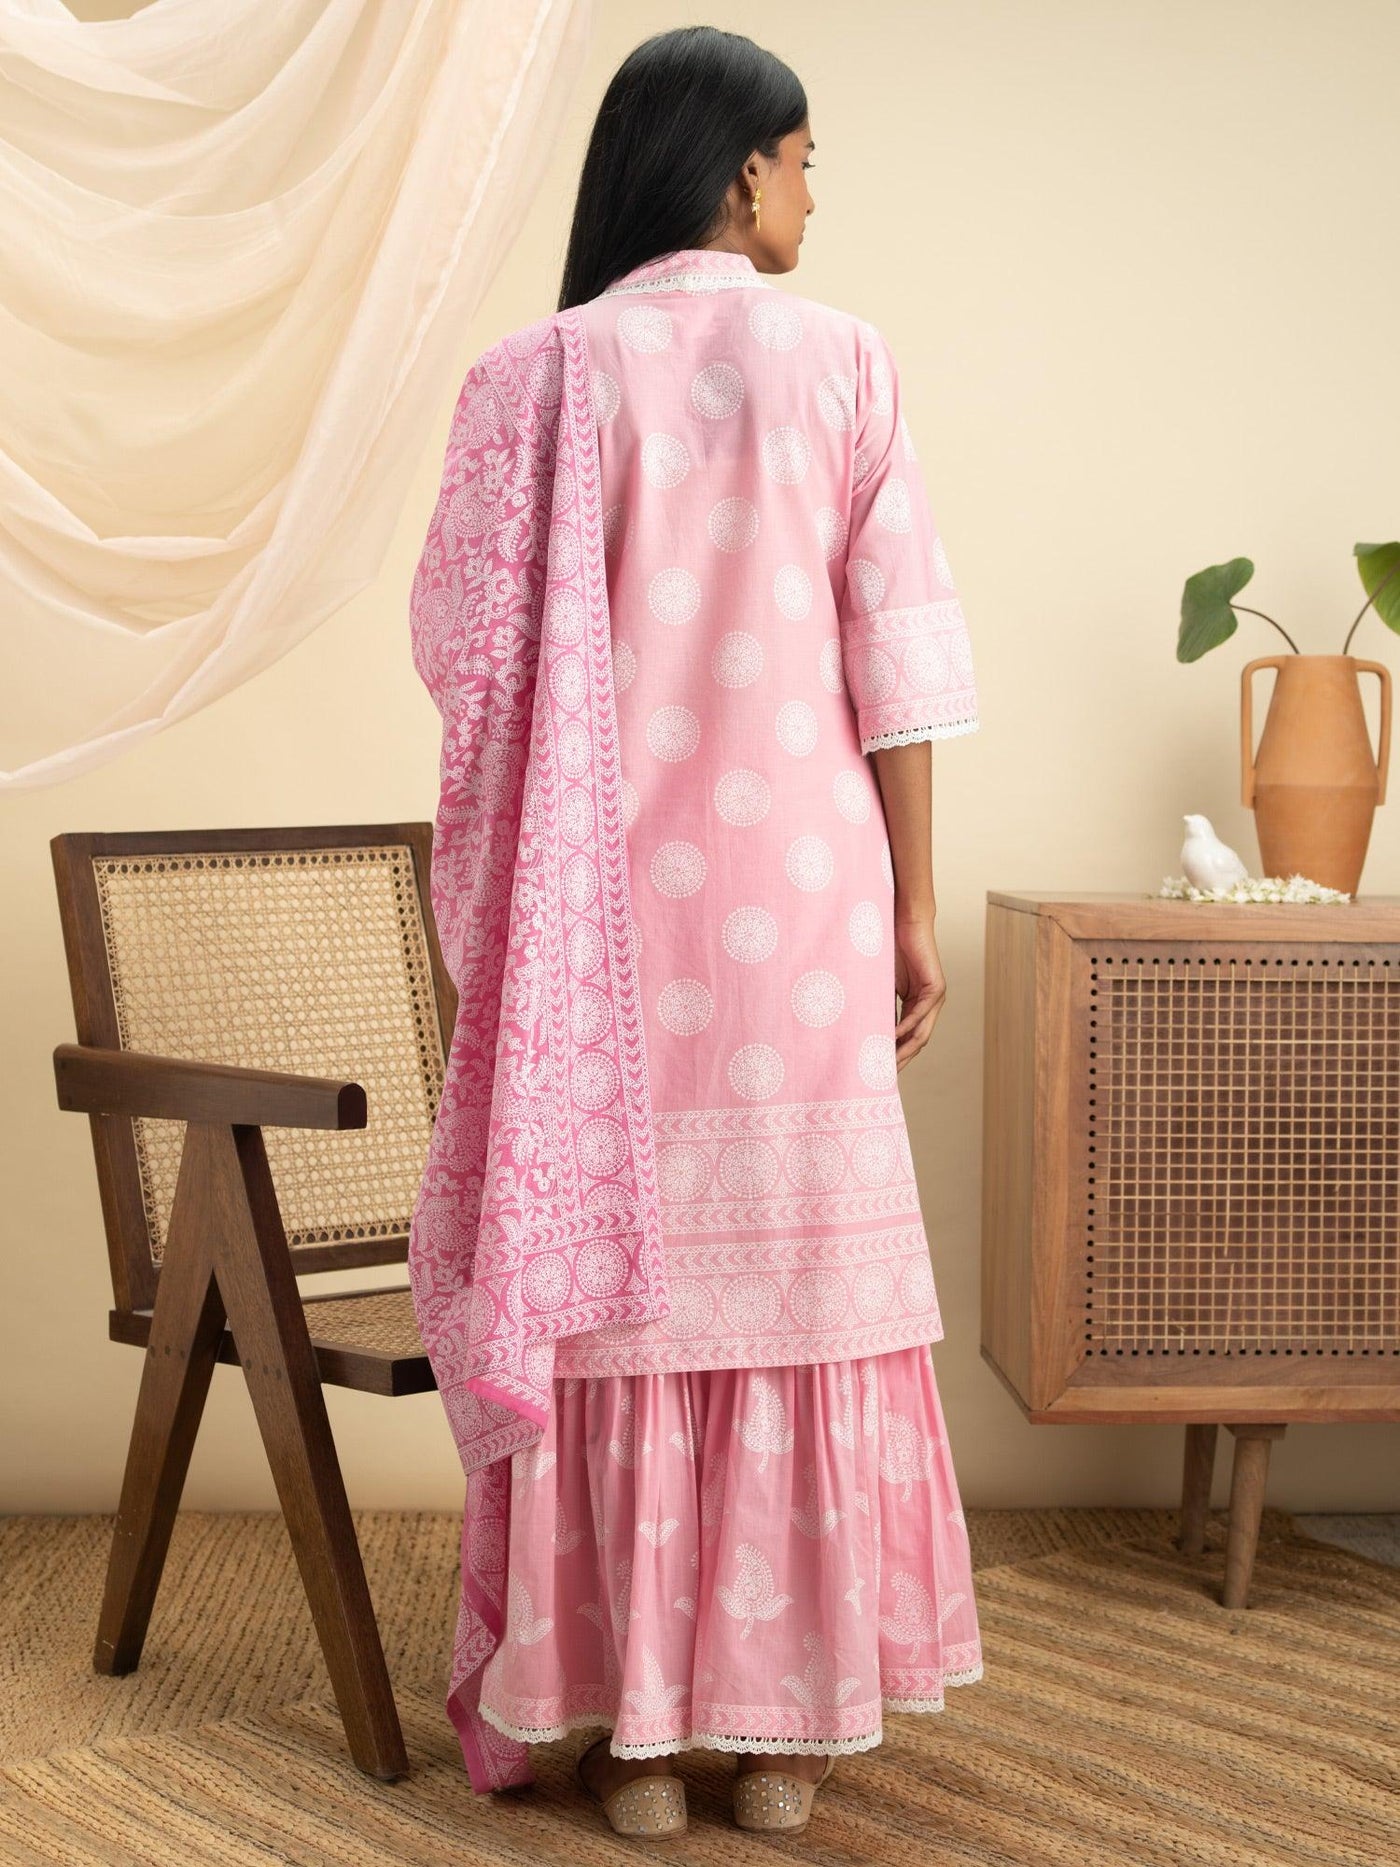 Pink Printed Cotton Straight Suit Set - Libas